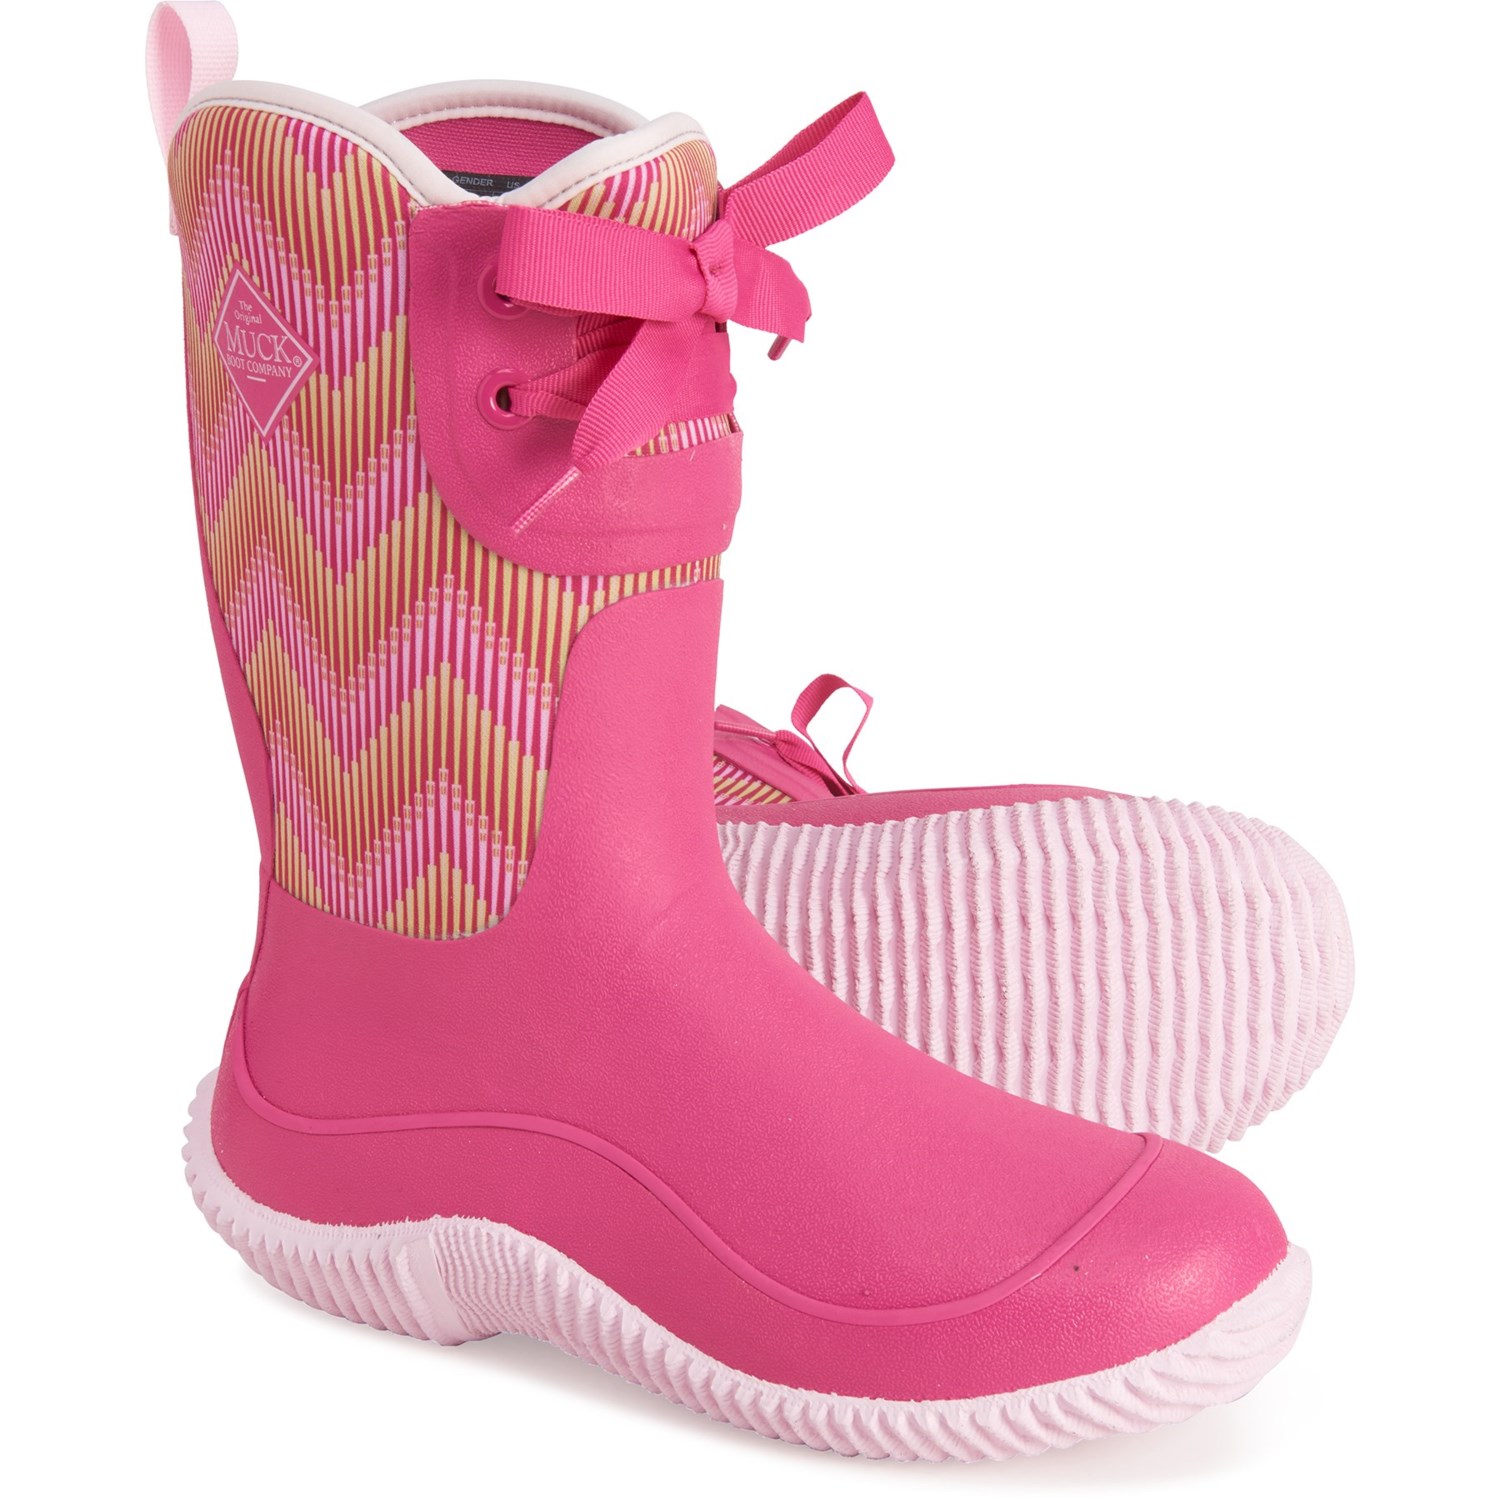 Muck Boot Company Halo Prints Boots 